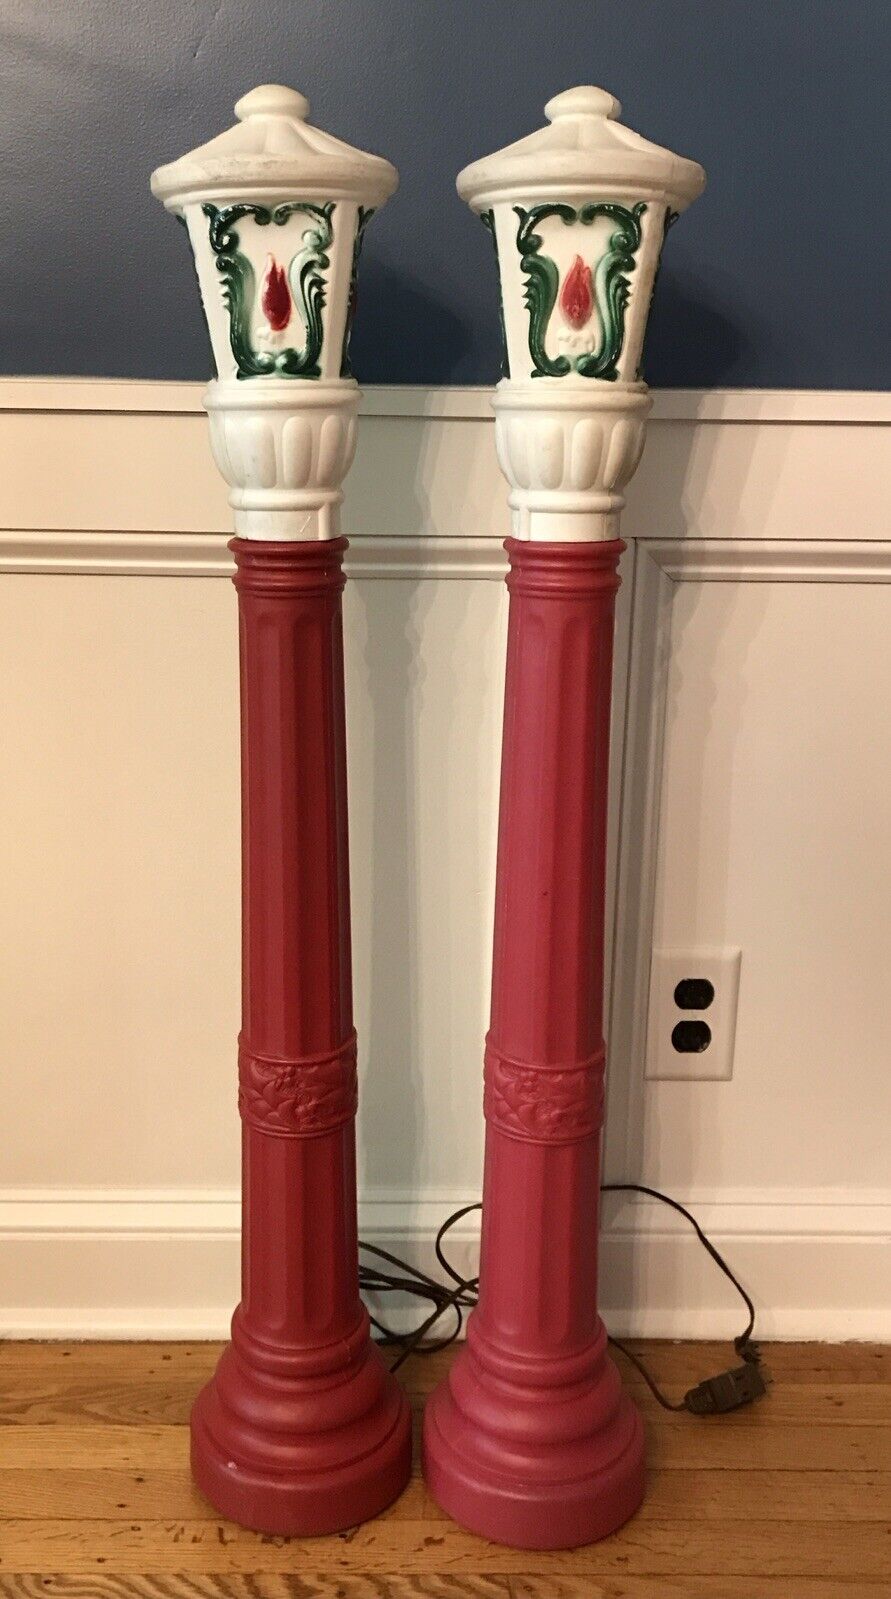 VTG Empire Blow Mold FLAME Light Post Plastic Yard Lamps 1969- PAIR ~Local Only